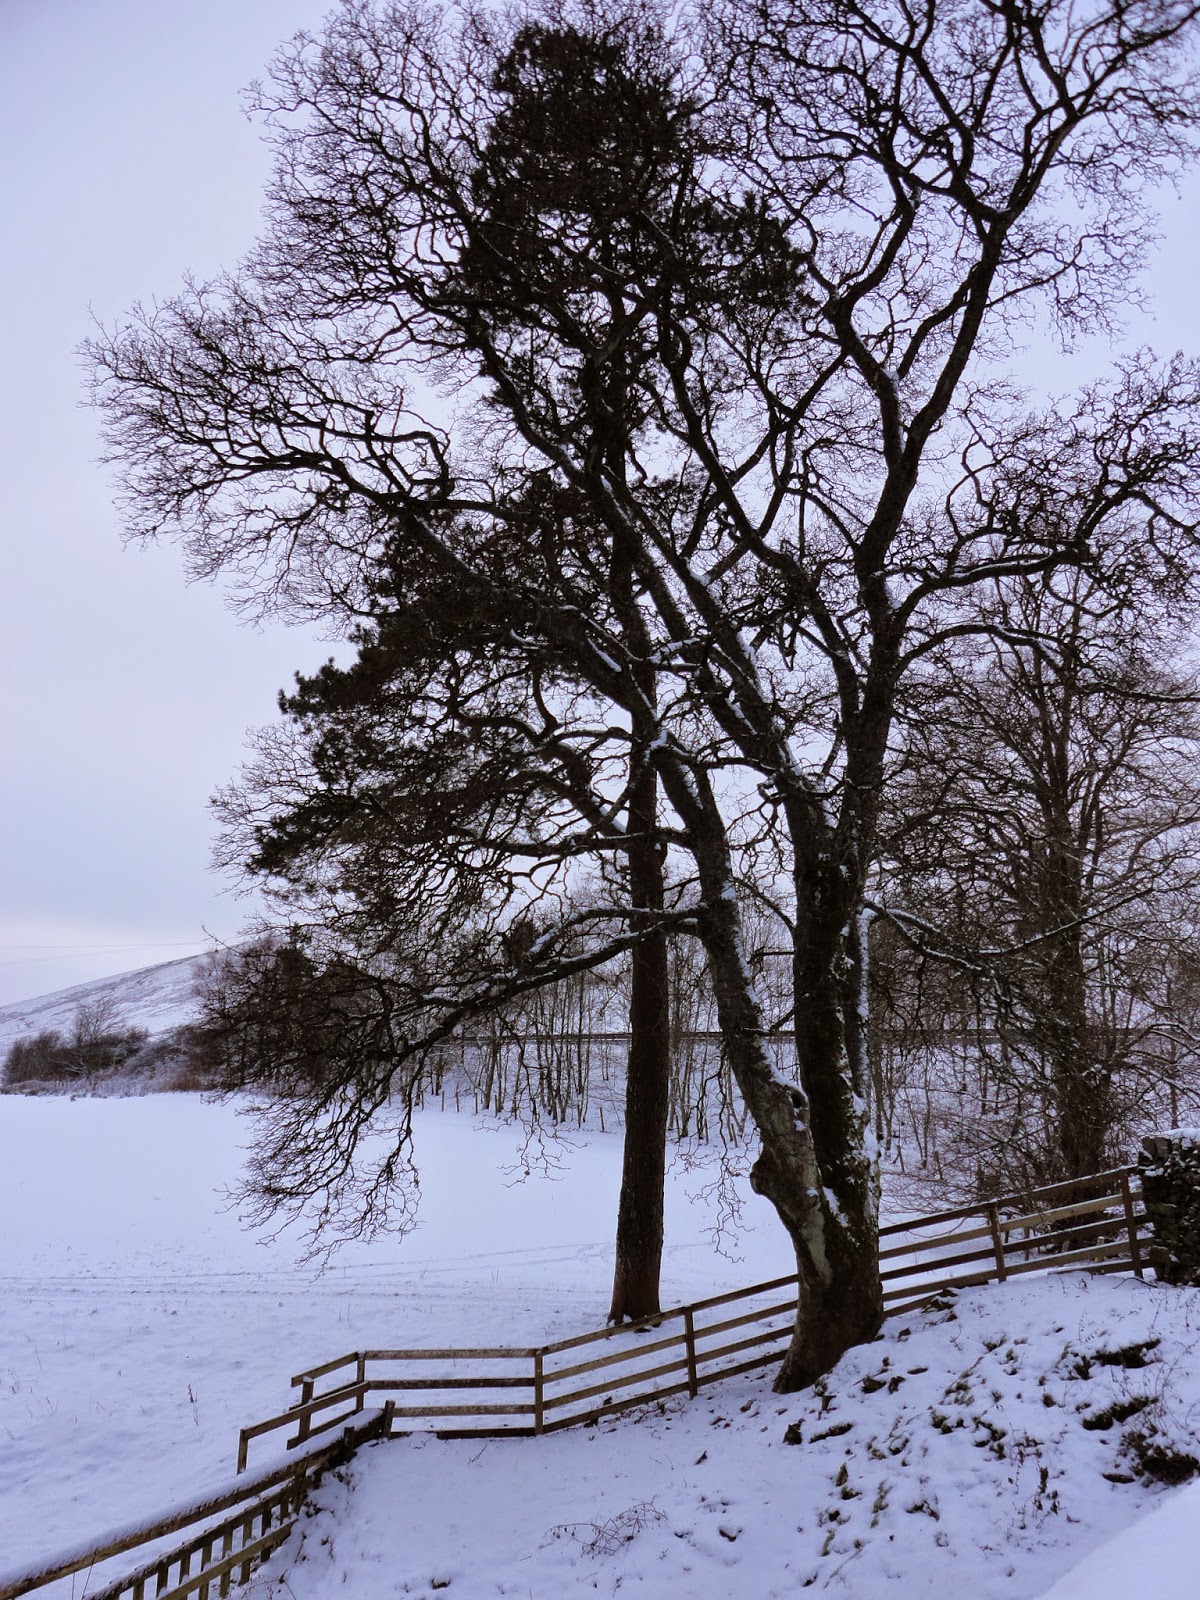 country farm landscape with trees, hills and snow in winter in scotland